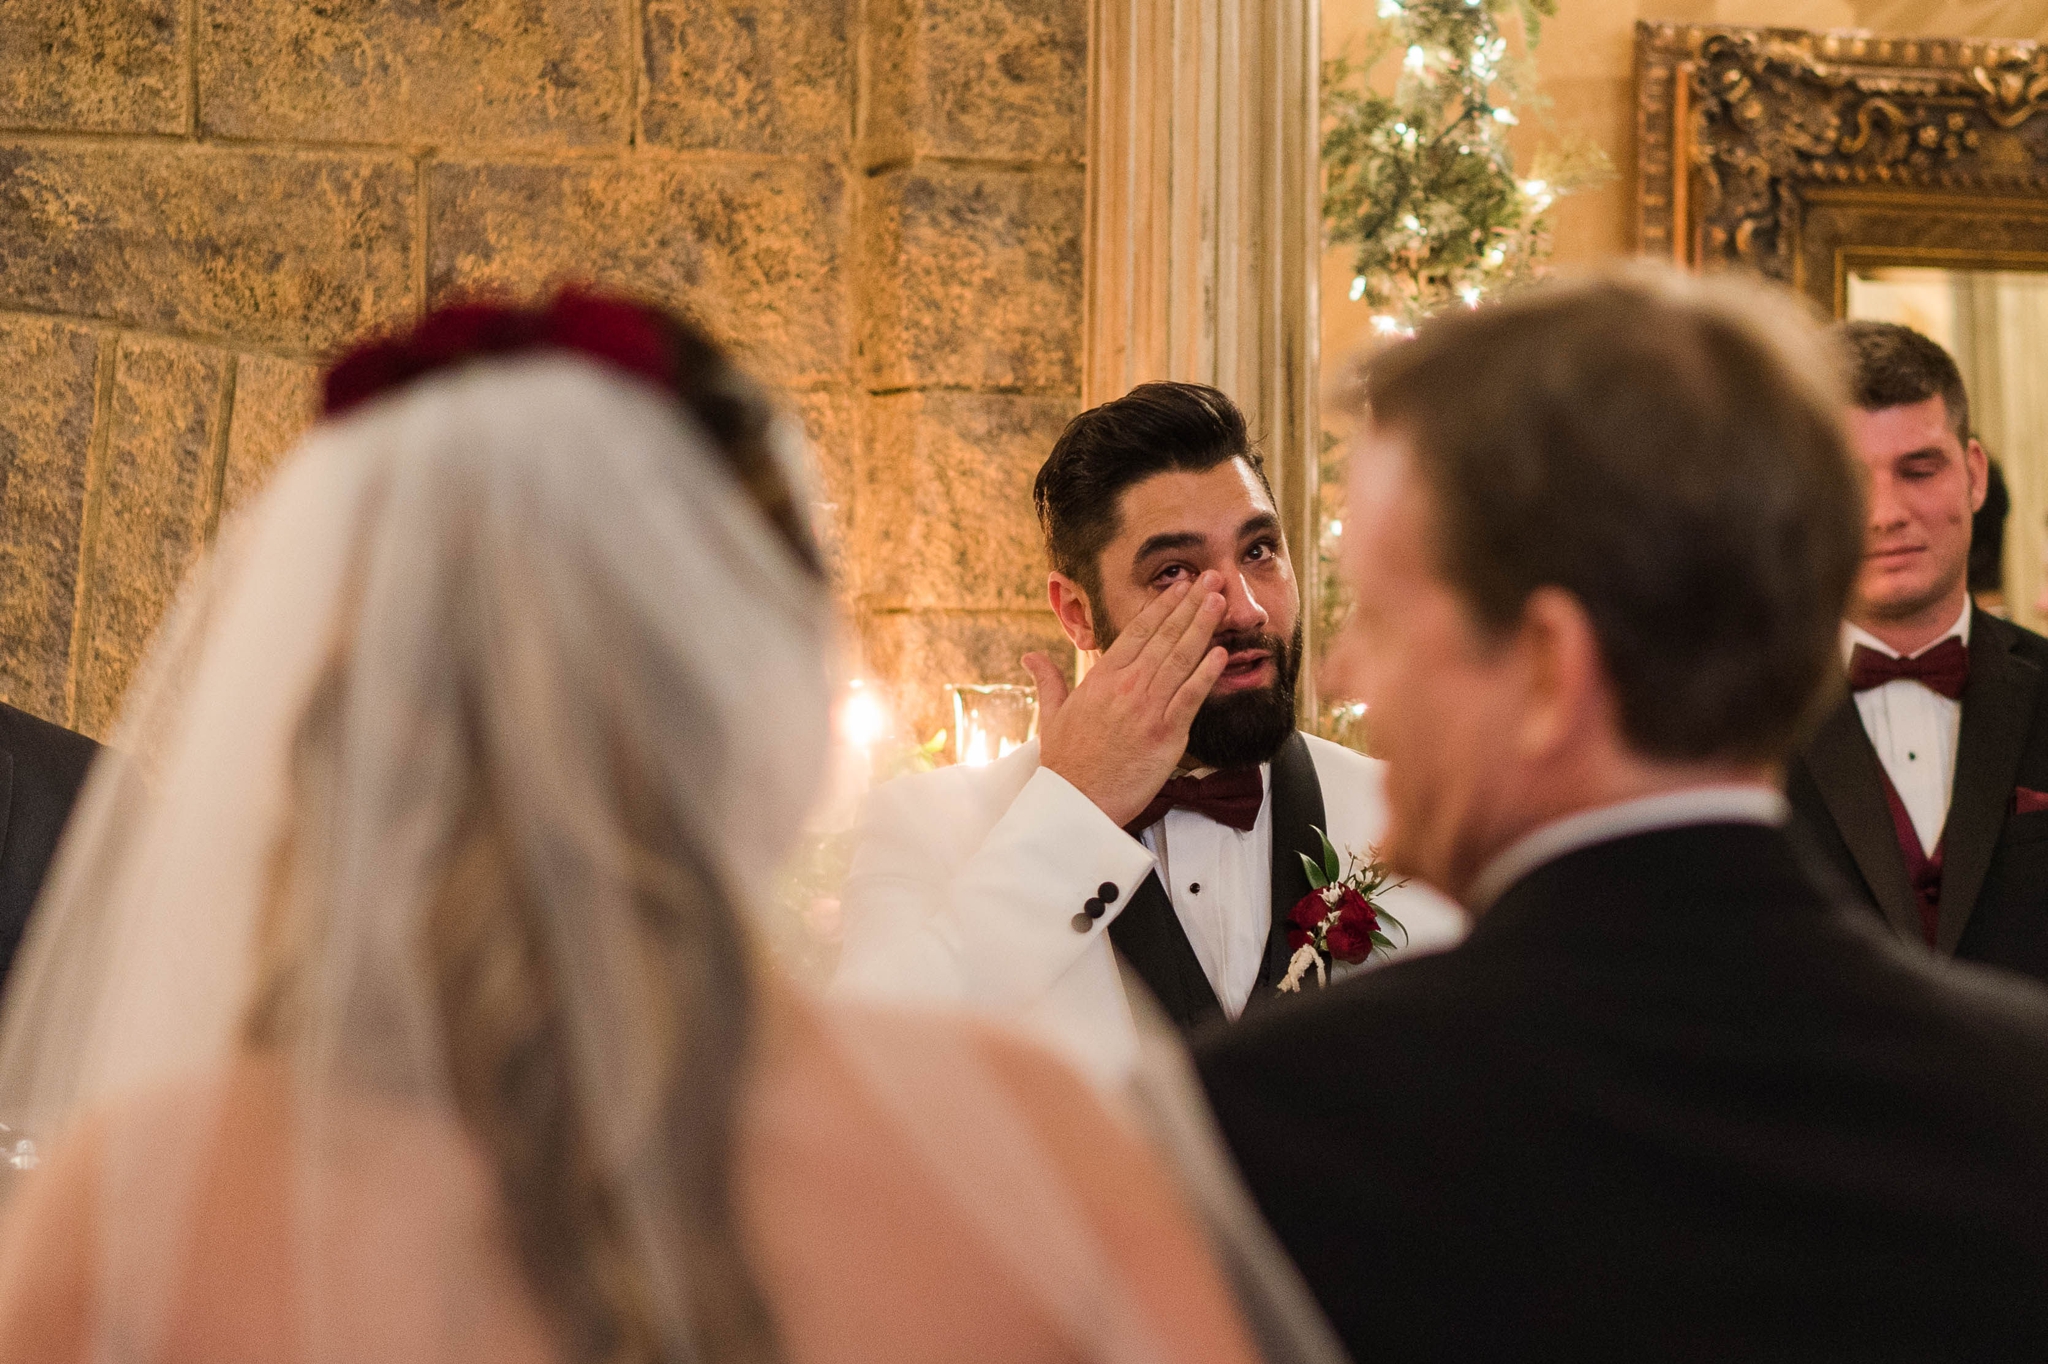 Groom wiping the tears from his face as he sees his bride standing in front of him at the altar - Honolulu Oahu Hawaii Wedding Photographer